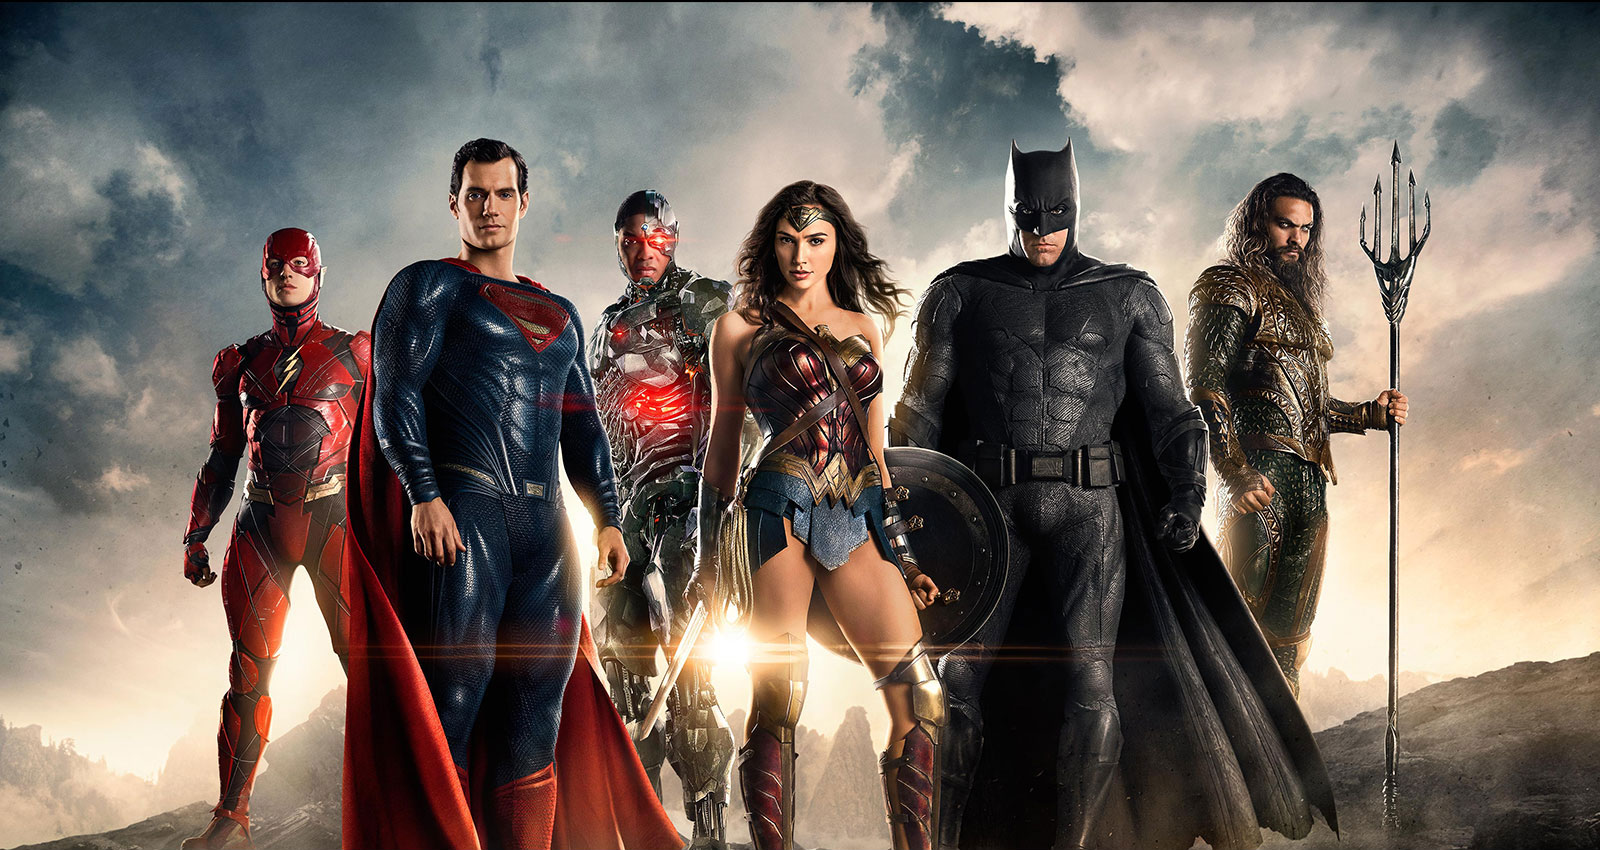 What Happened to Justice League?